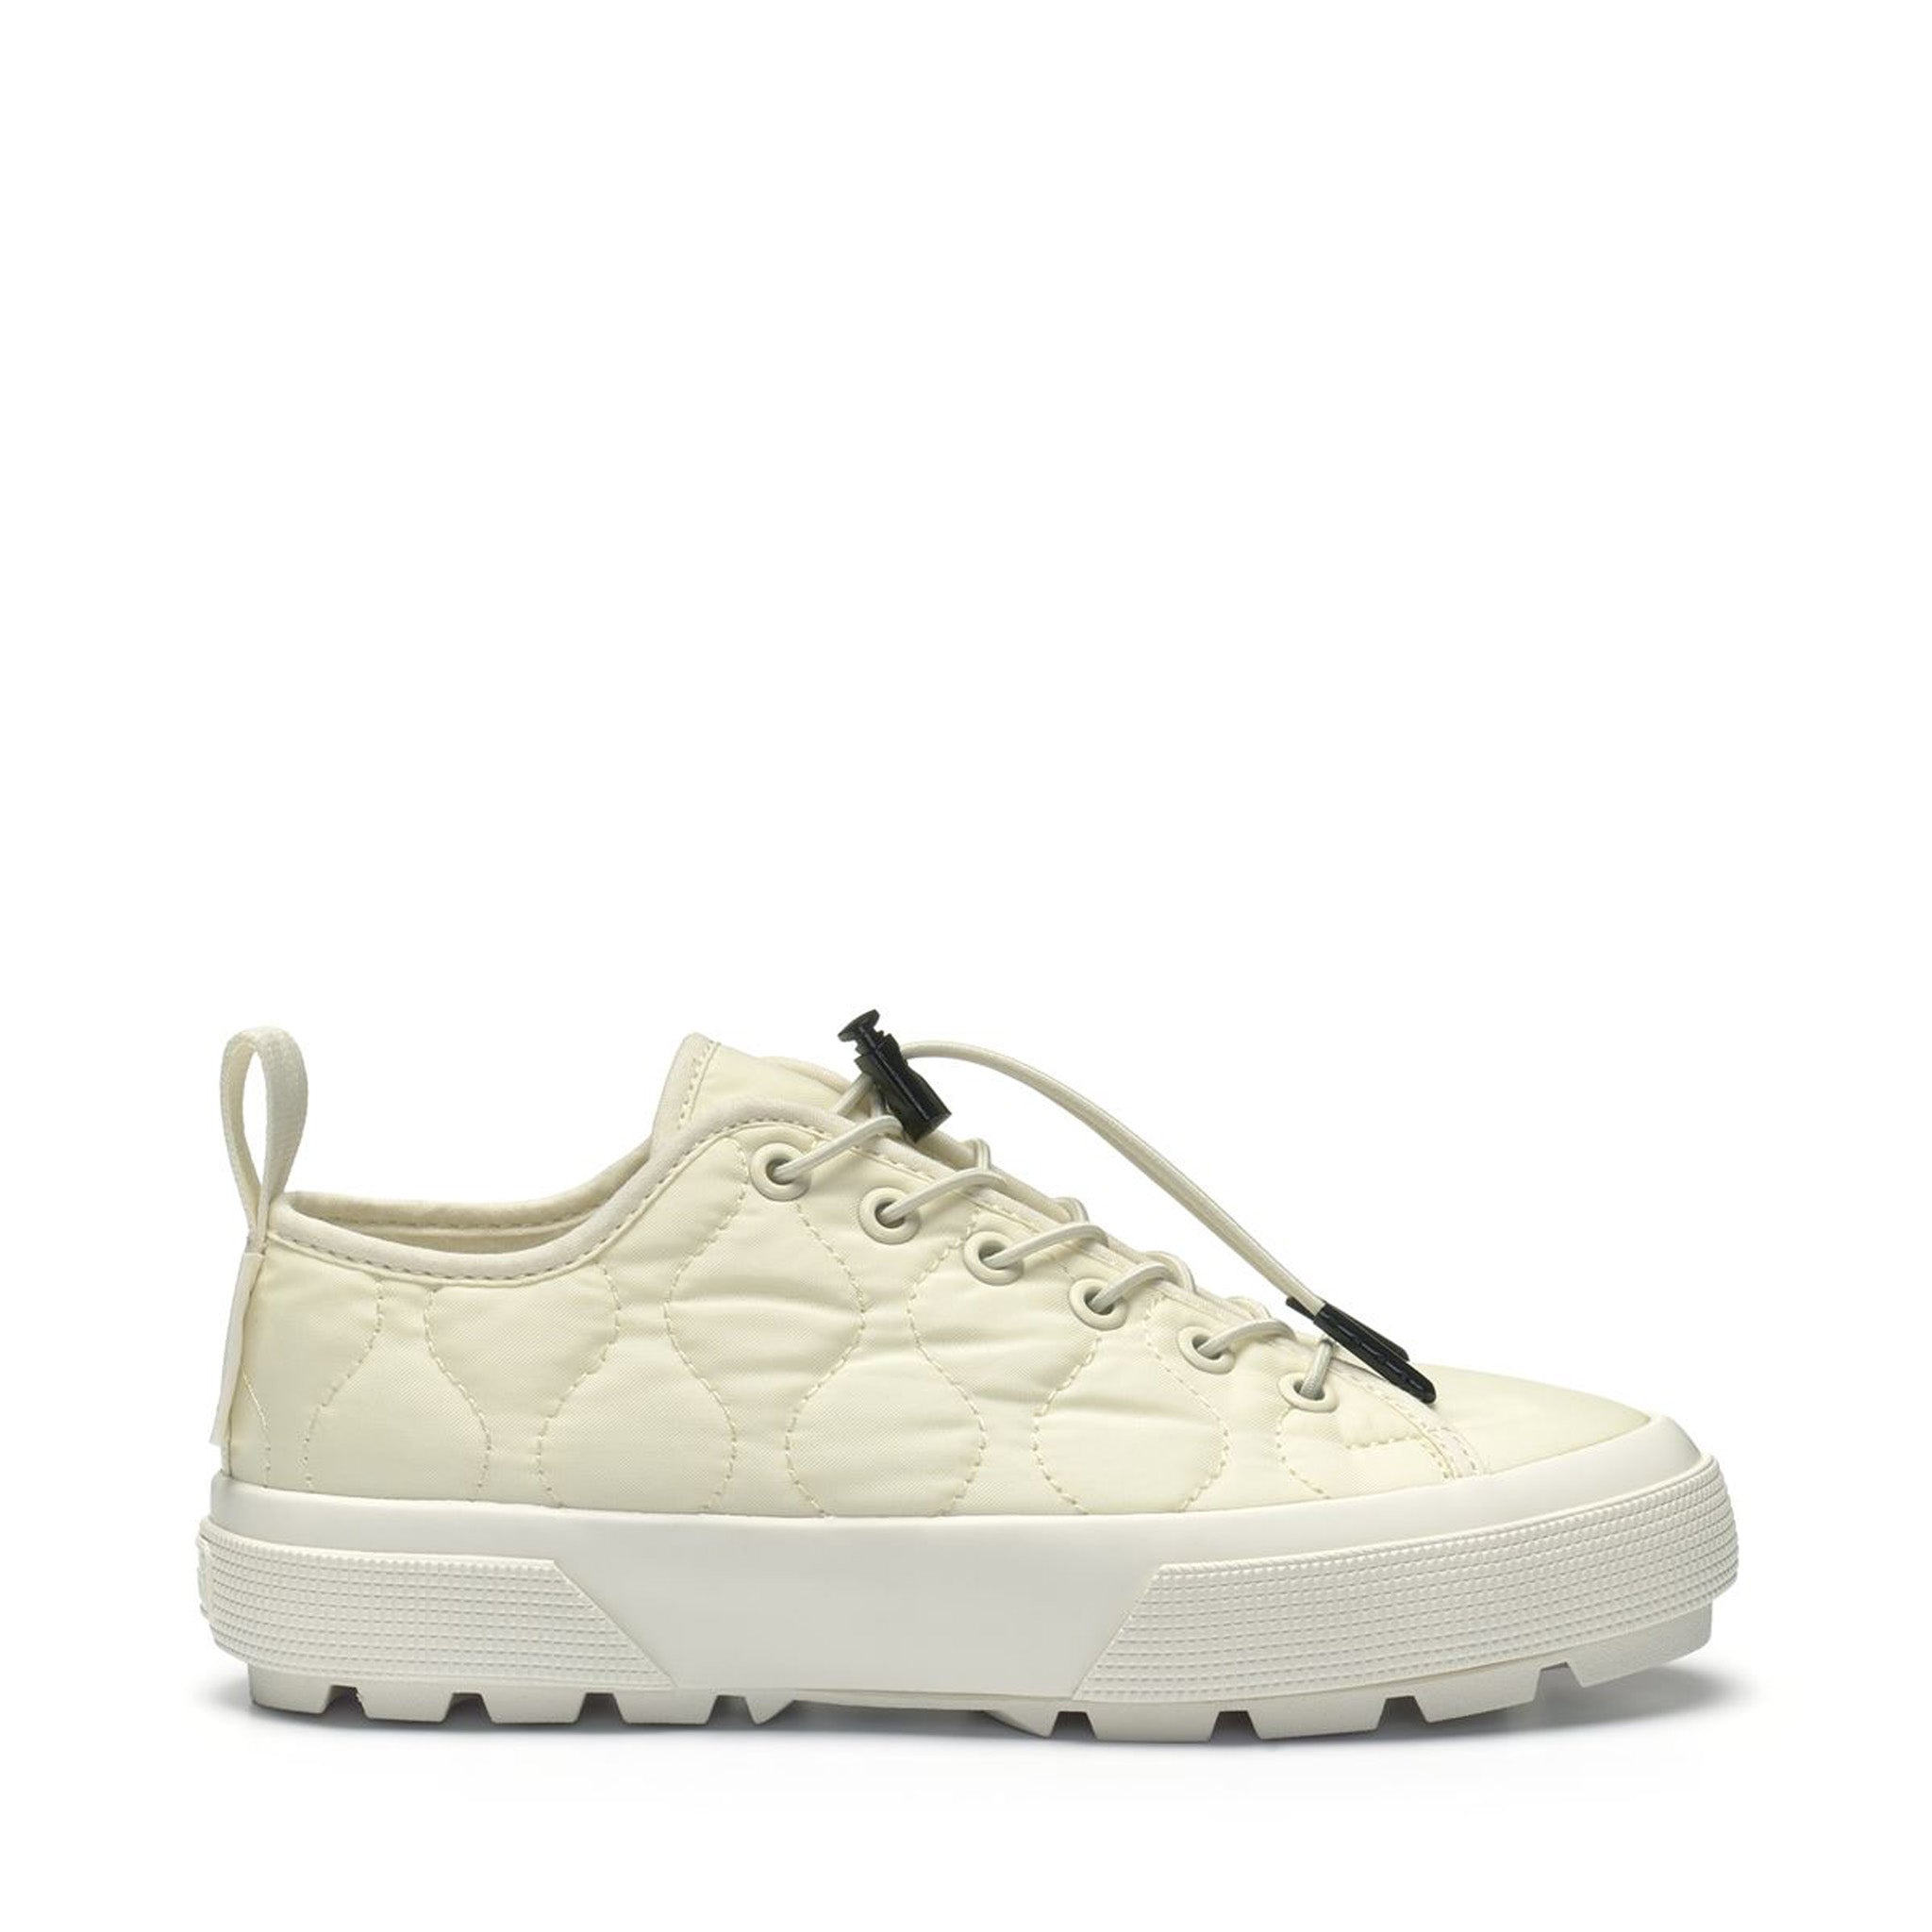 2625 Tank Quilted Nylon Sneakers - Beige Natural Avorio. Side view.